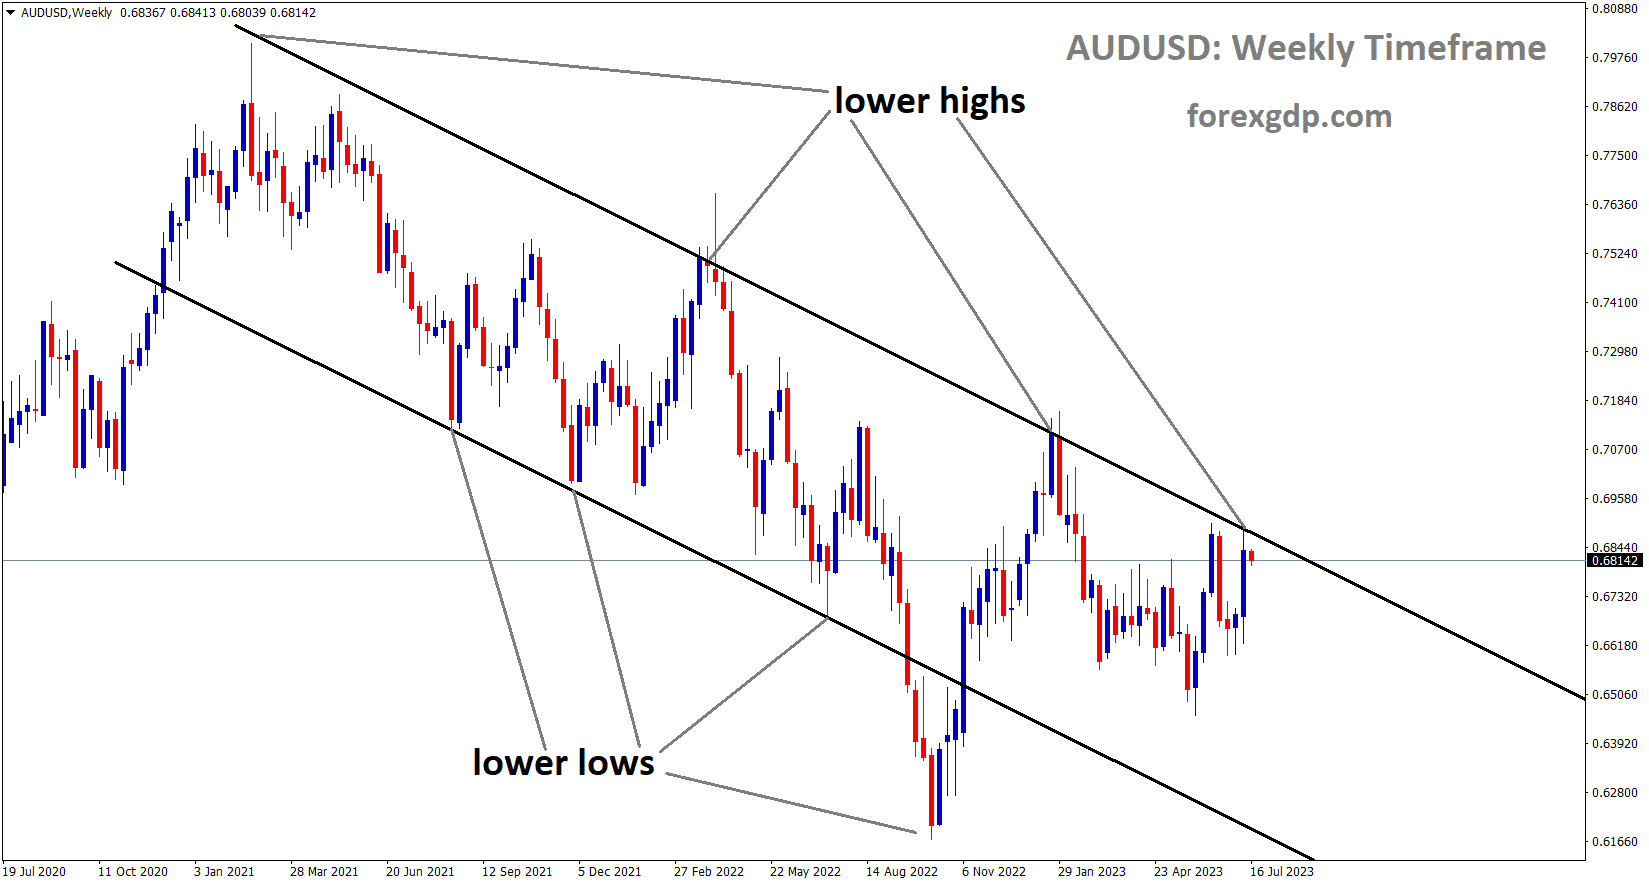 AUDUSD is moving in the Descending channel and the market has reached the lower high area of the channel 2